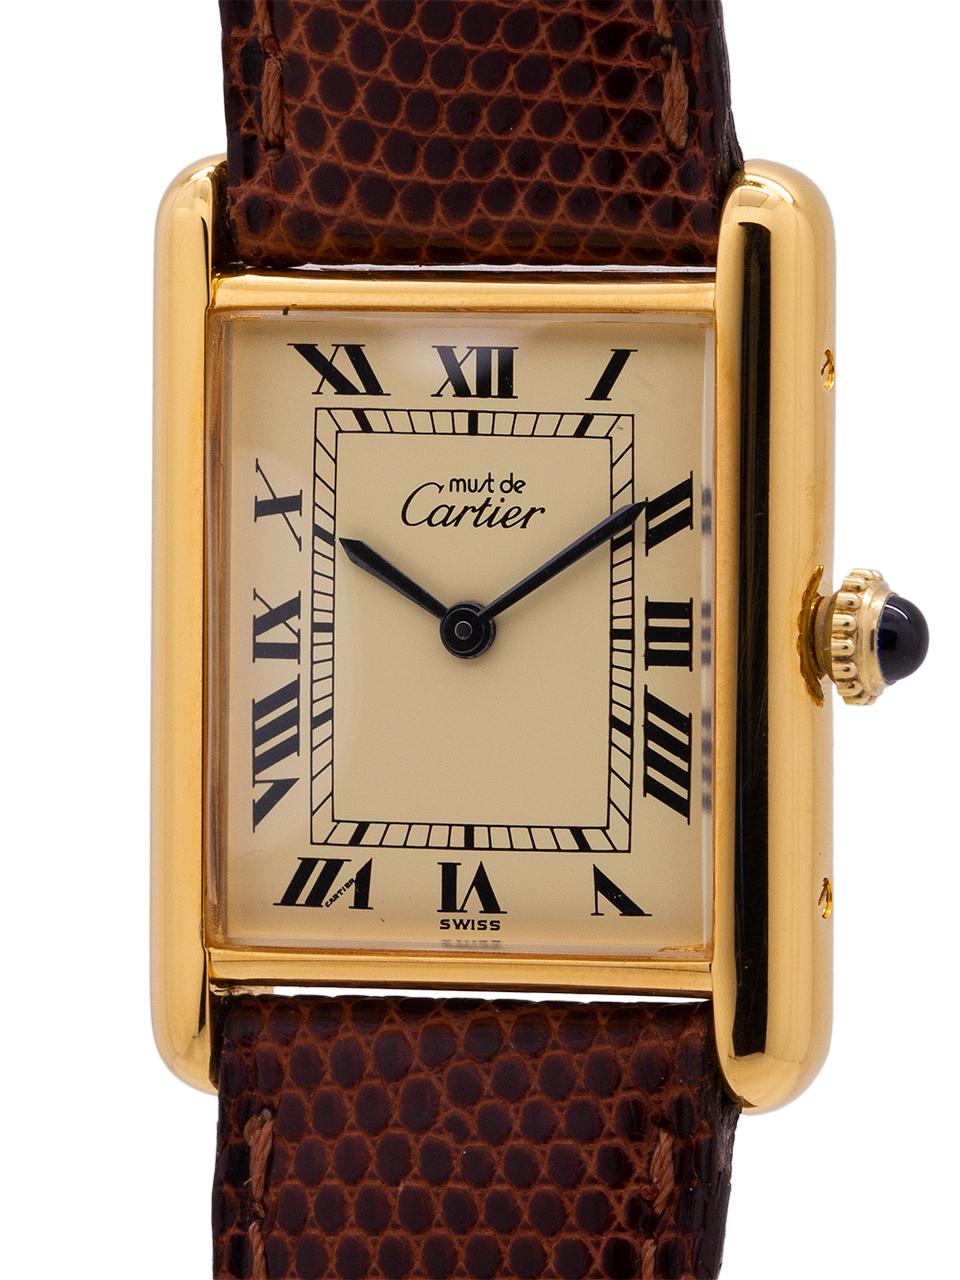 
Cartier man’s Tank Louis circa 1990s. Featuring 24 x 30mm vermeil (20 microns gold over silver) case secured by 4 side and 4 case back screws. Featuring classic cream color dial signed Must de Cartier with printed black Roman numerals and blued